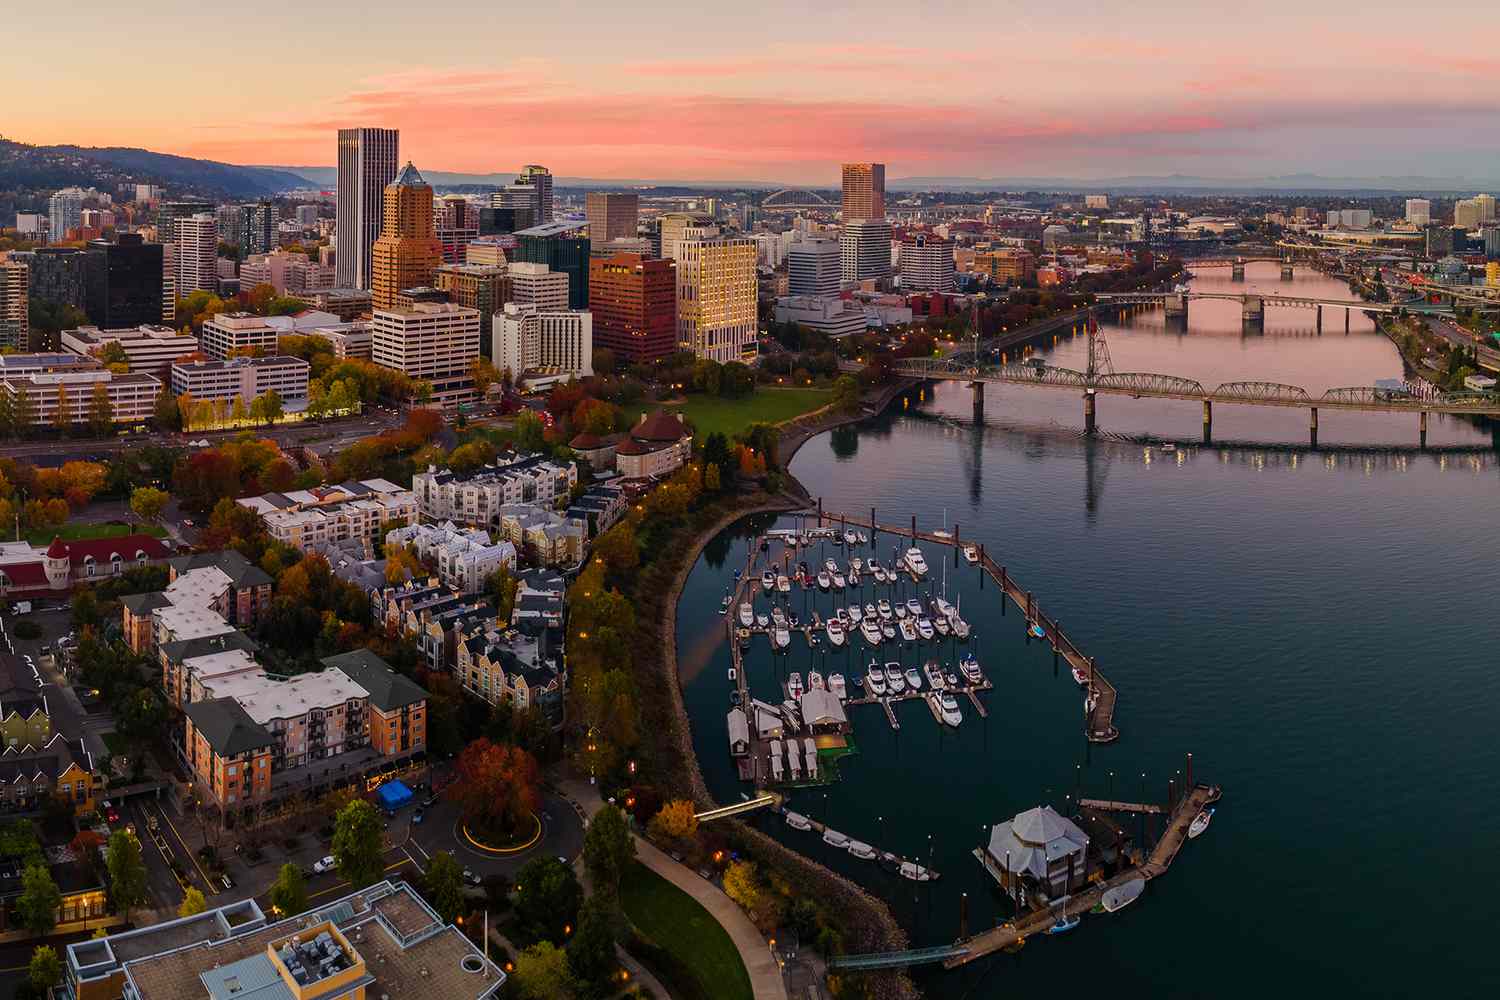 IN-DEPTH Travel Guide: Backpacking Portland